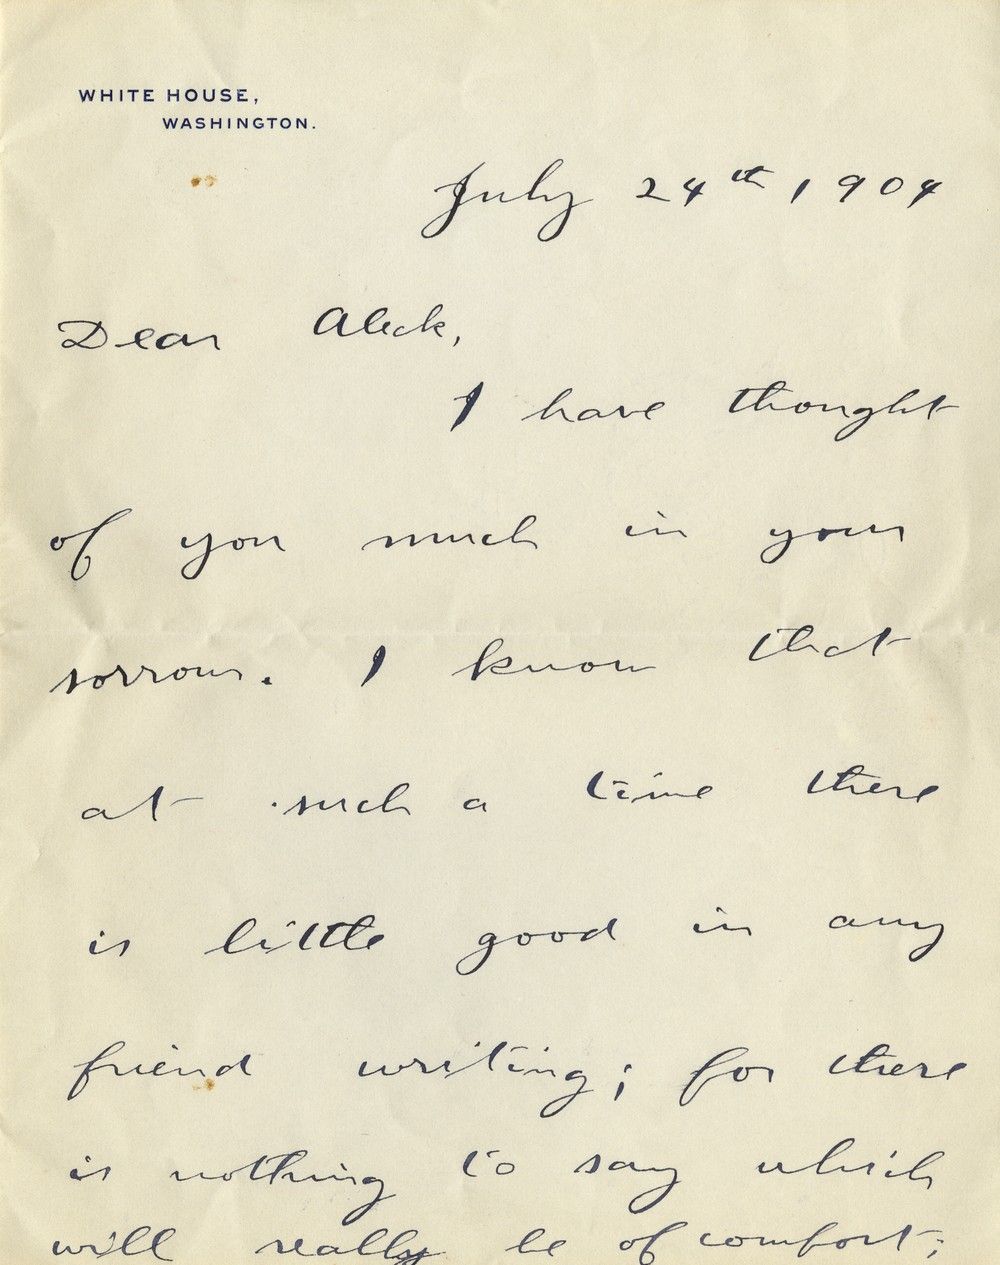 Theodore Roosevelt: a Condolence Letter on the Death of a Friend's Father